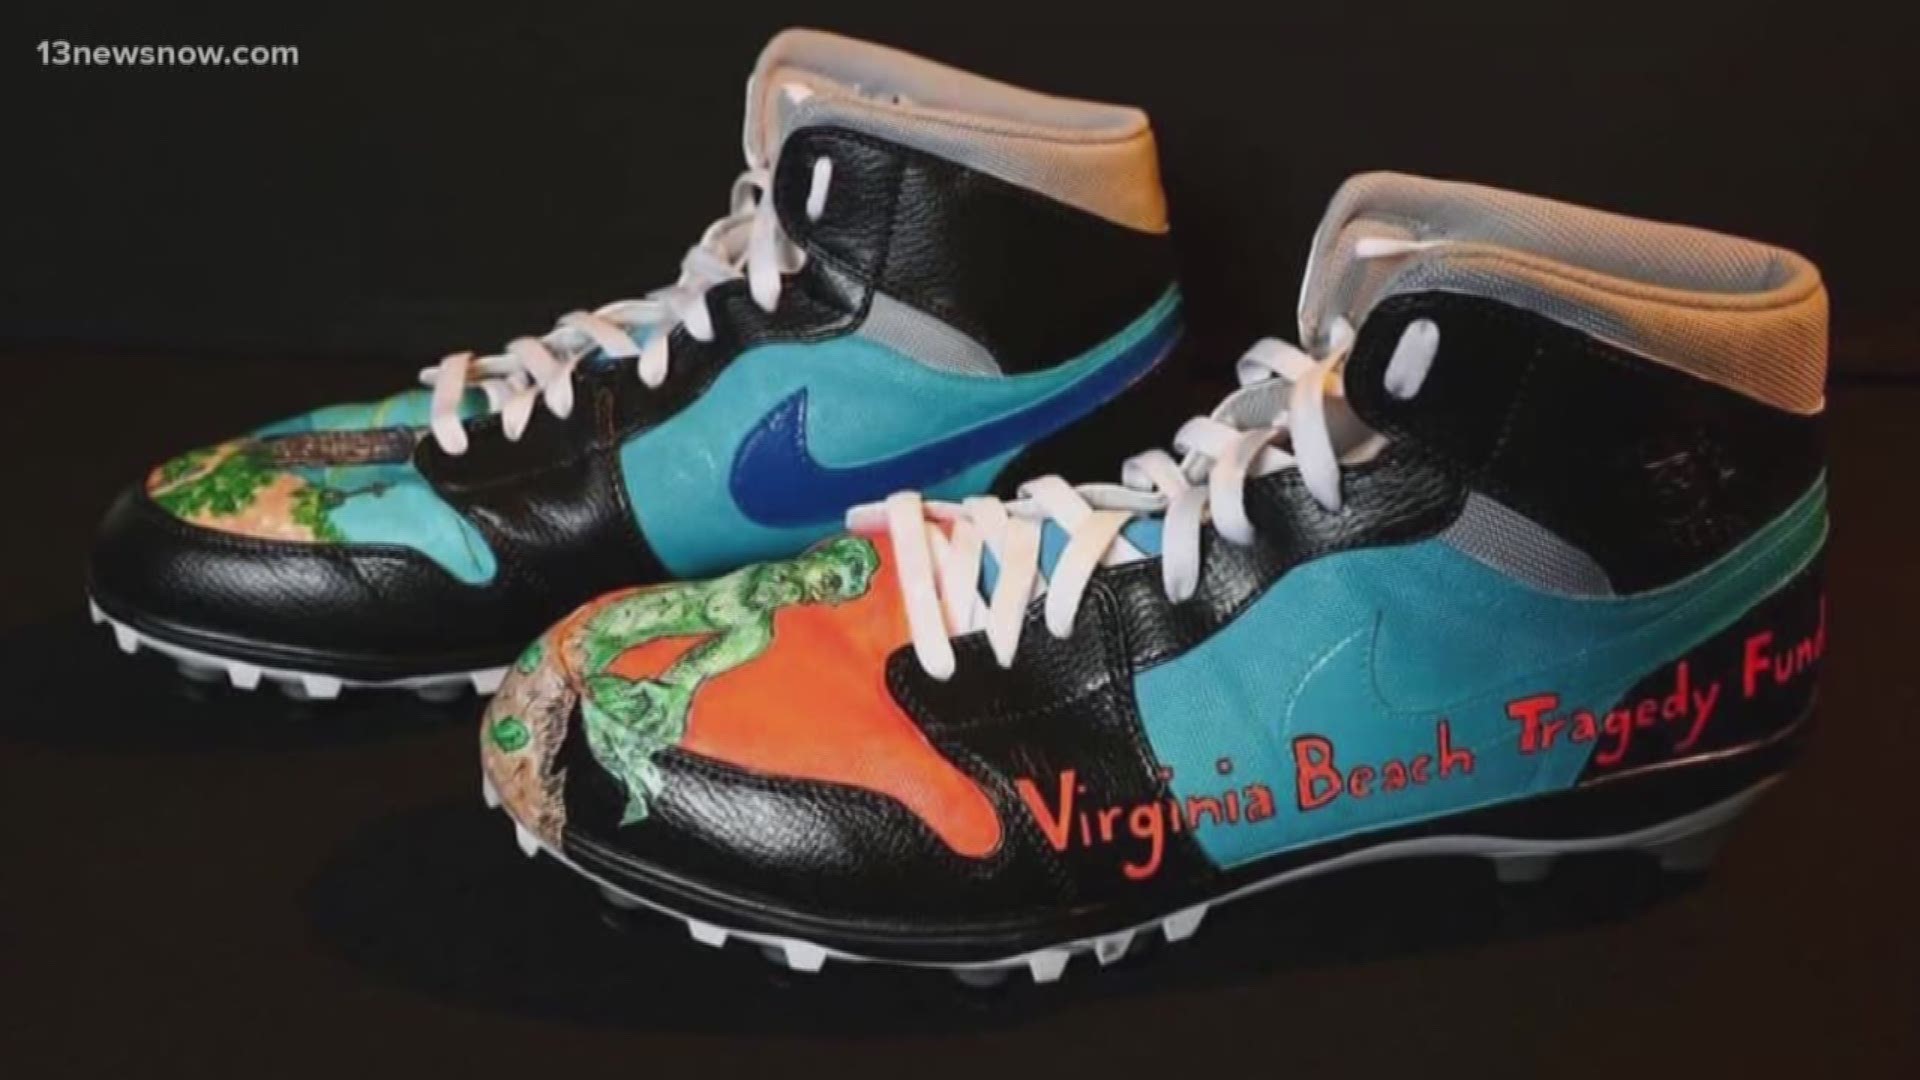 Virginia Beach Native and Kansas City Chiefs defensive tackle Derrick Nnadi designed his cleats in support of the Virginia Beach Tragedy Fund.